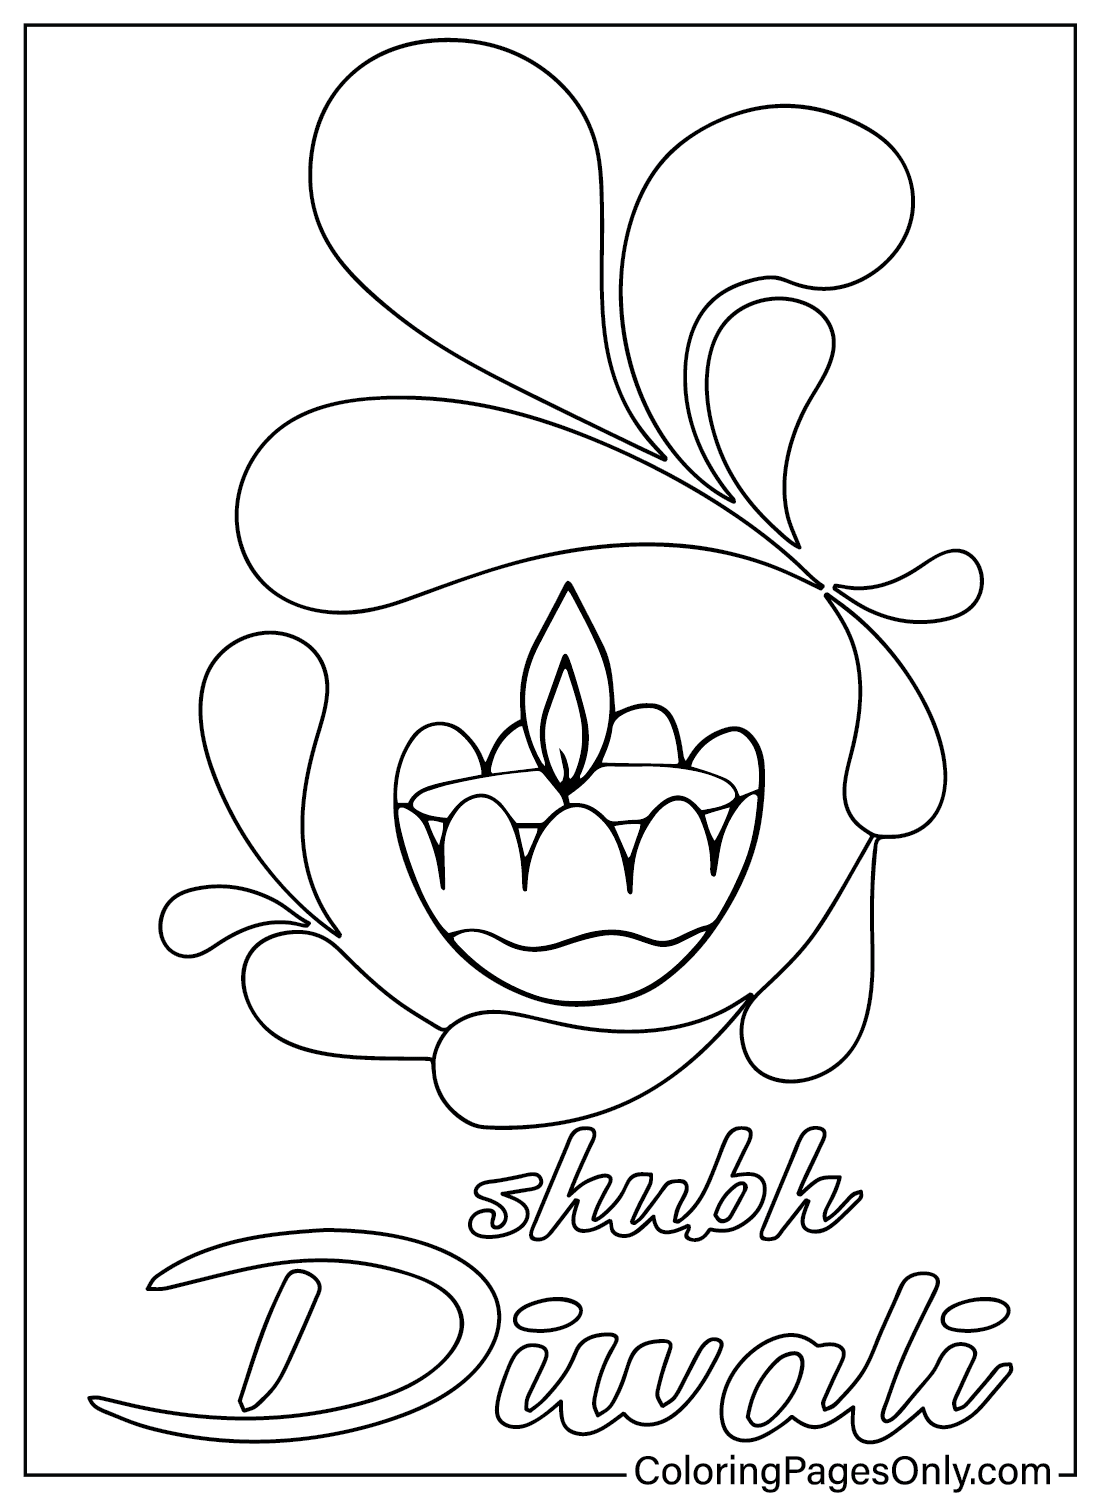 Free Diwali Coloring Page from Diwali